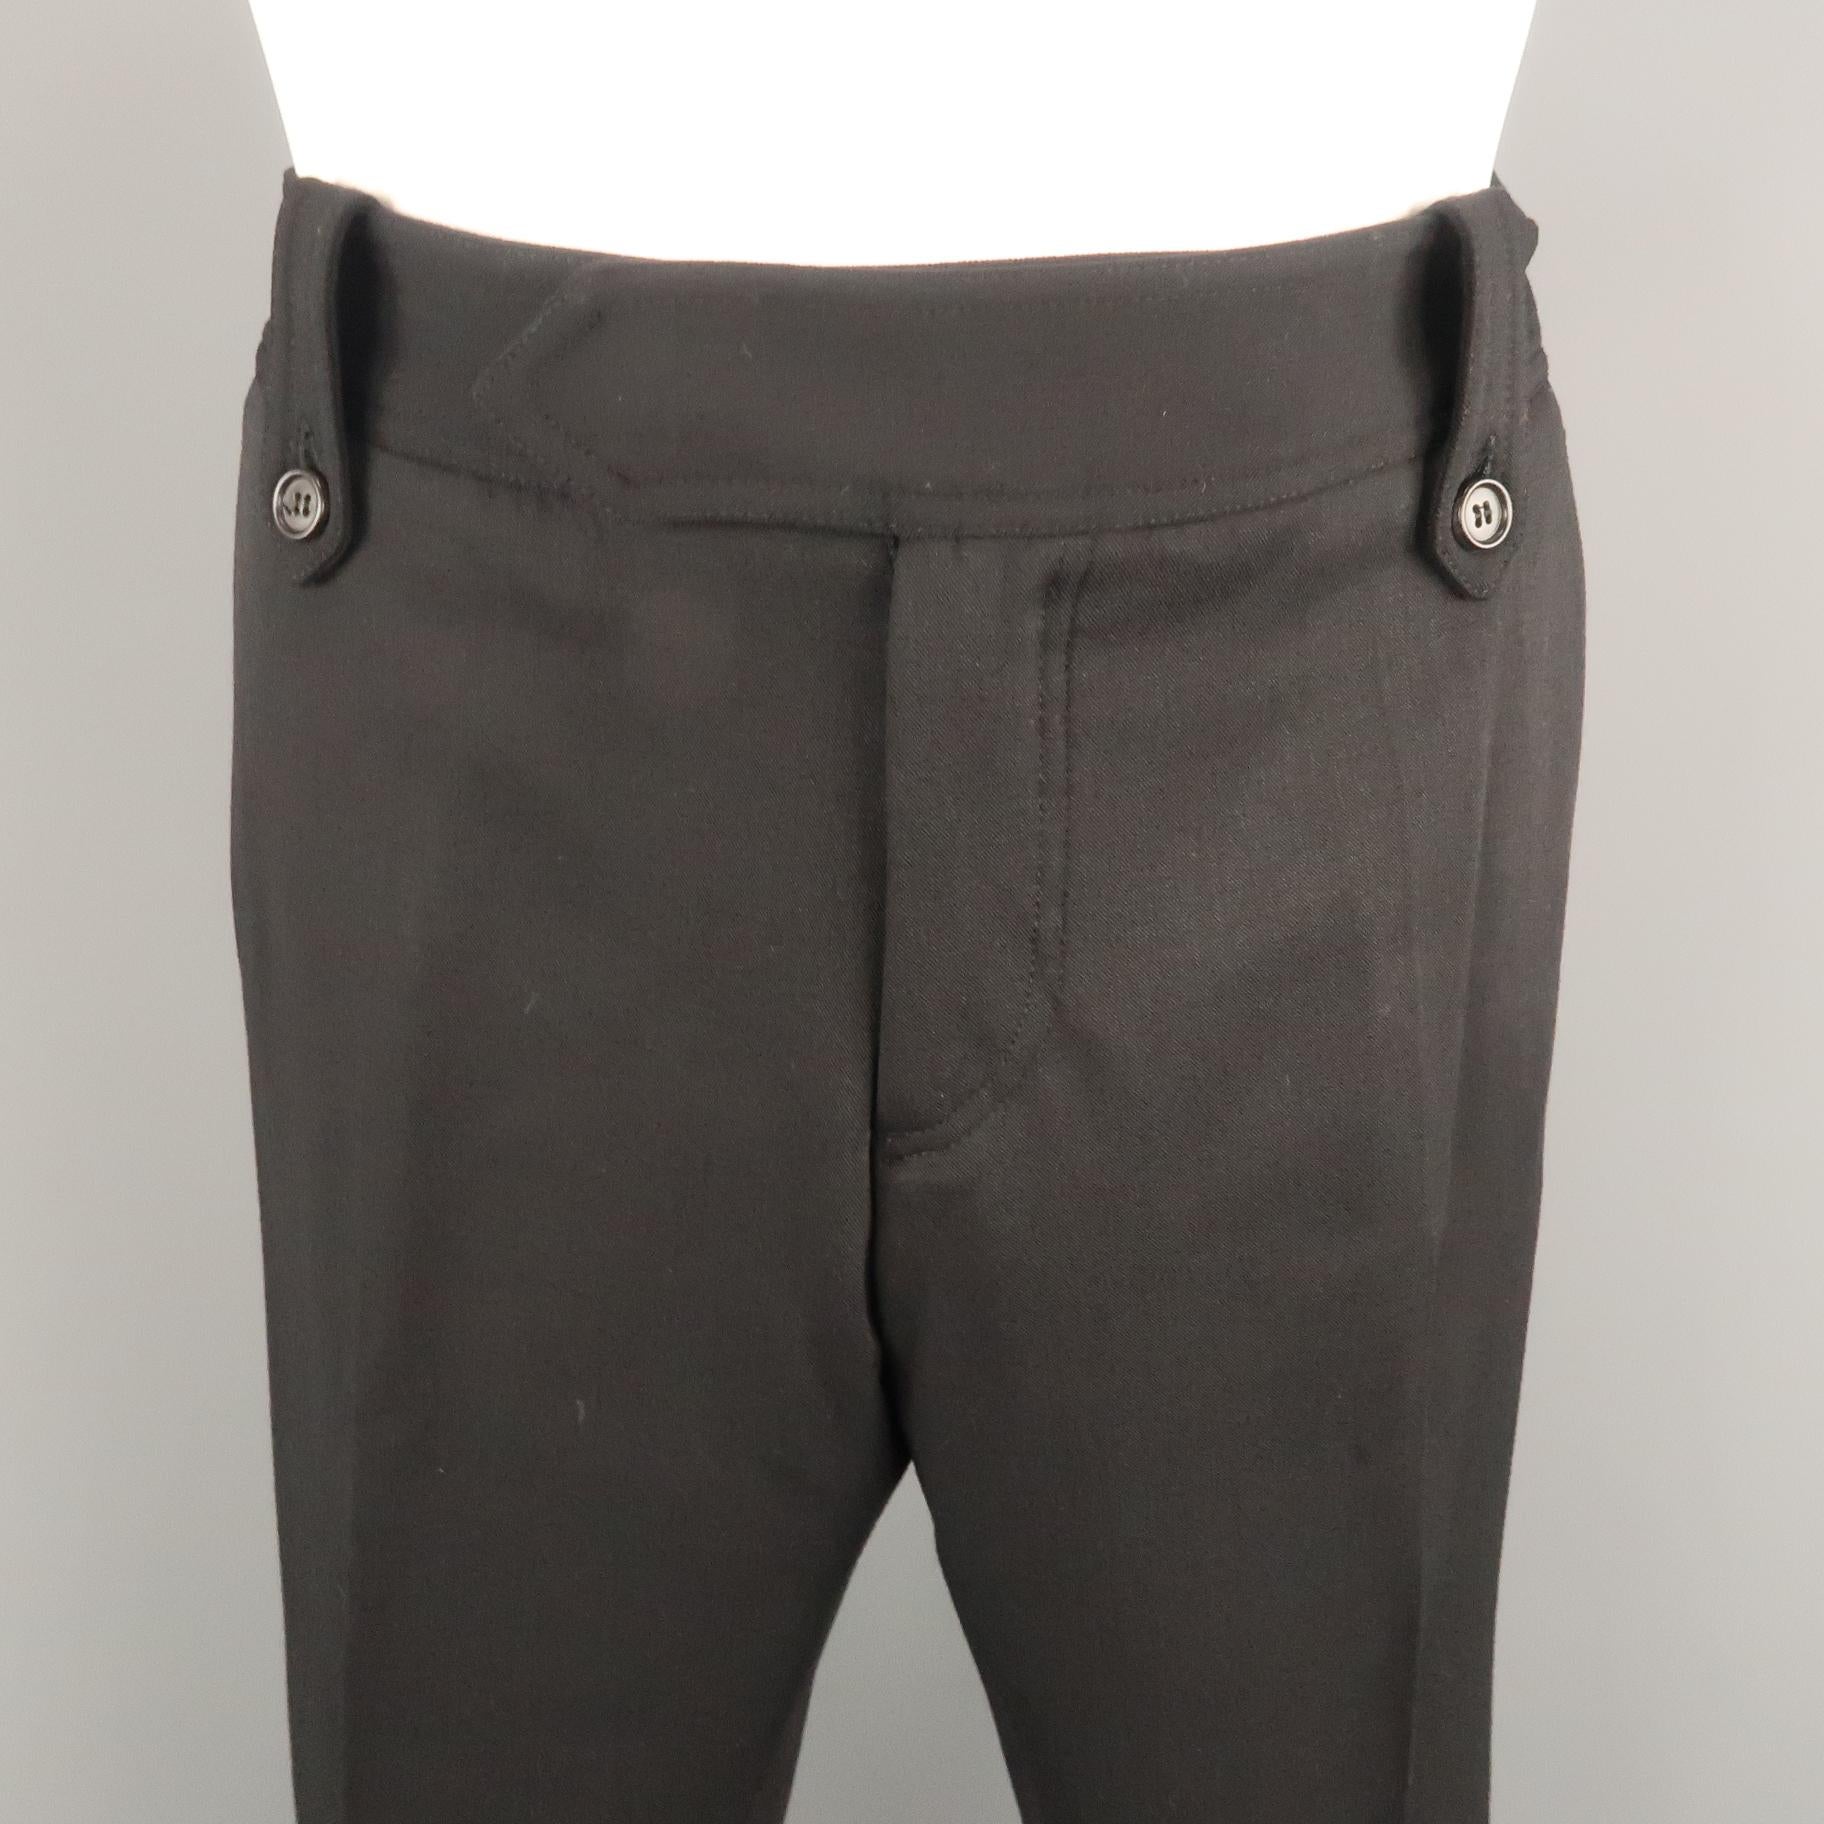 DIOR HOMME dress pant comes in a black wool blend featuring a flat front style and flap pockets. Made in Italy.
 
Excellent Pre-Owned Condition.
Marked: IT 50
 
Measurements:
 
Waist: 34 in.
Rise: 9 in.
Inseam: 32 in.